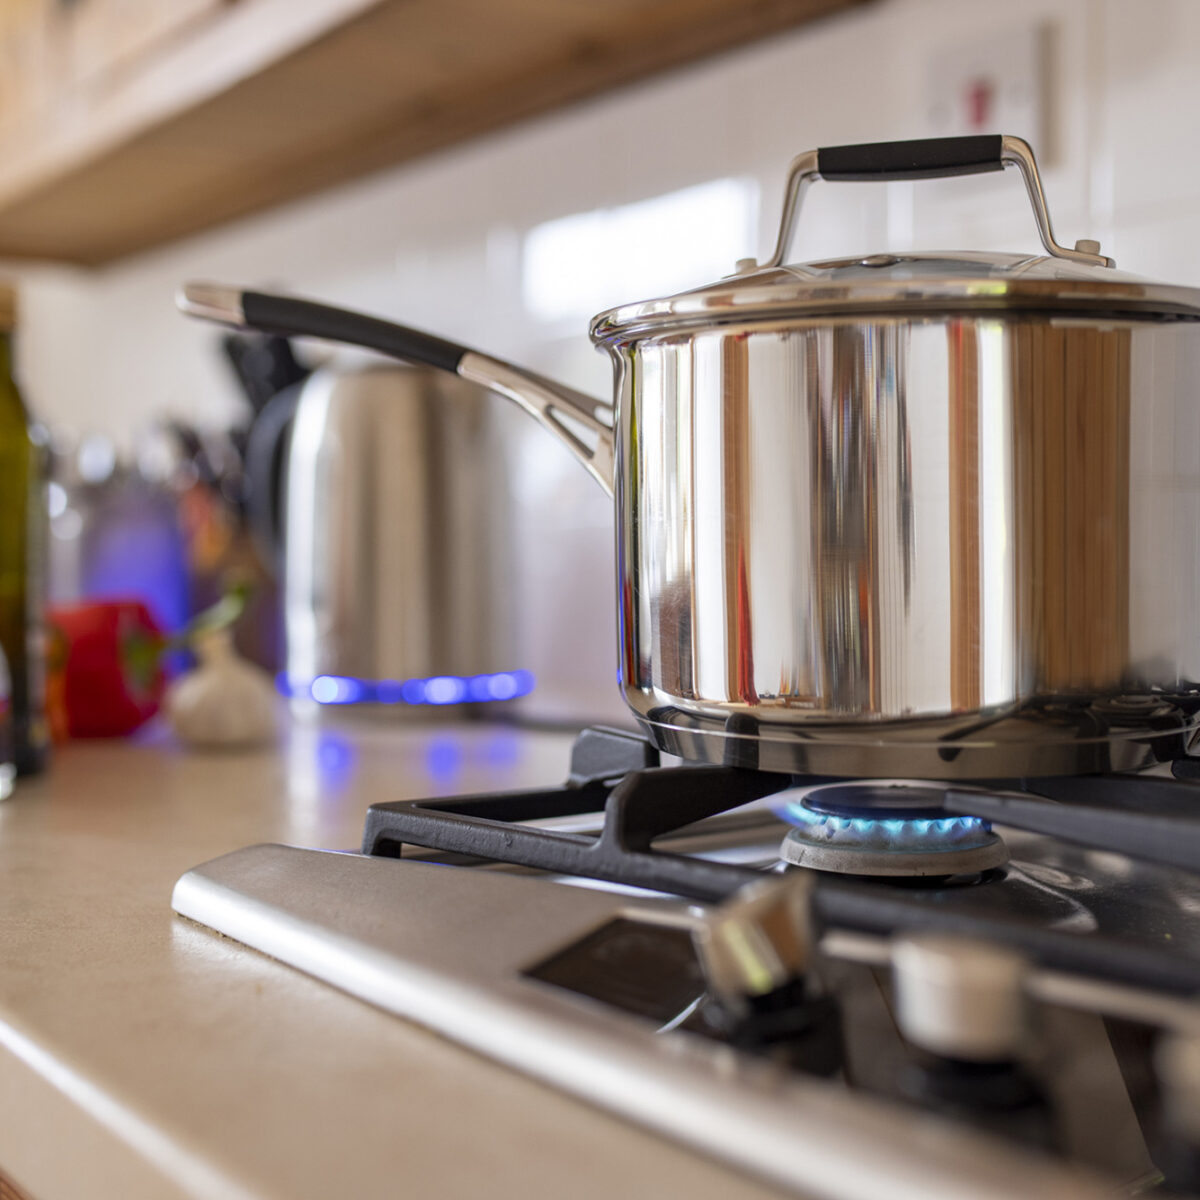 Should You Replace Your Gas Stove? The Brink Boston University photo